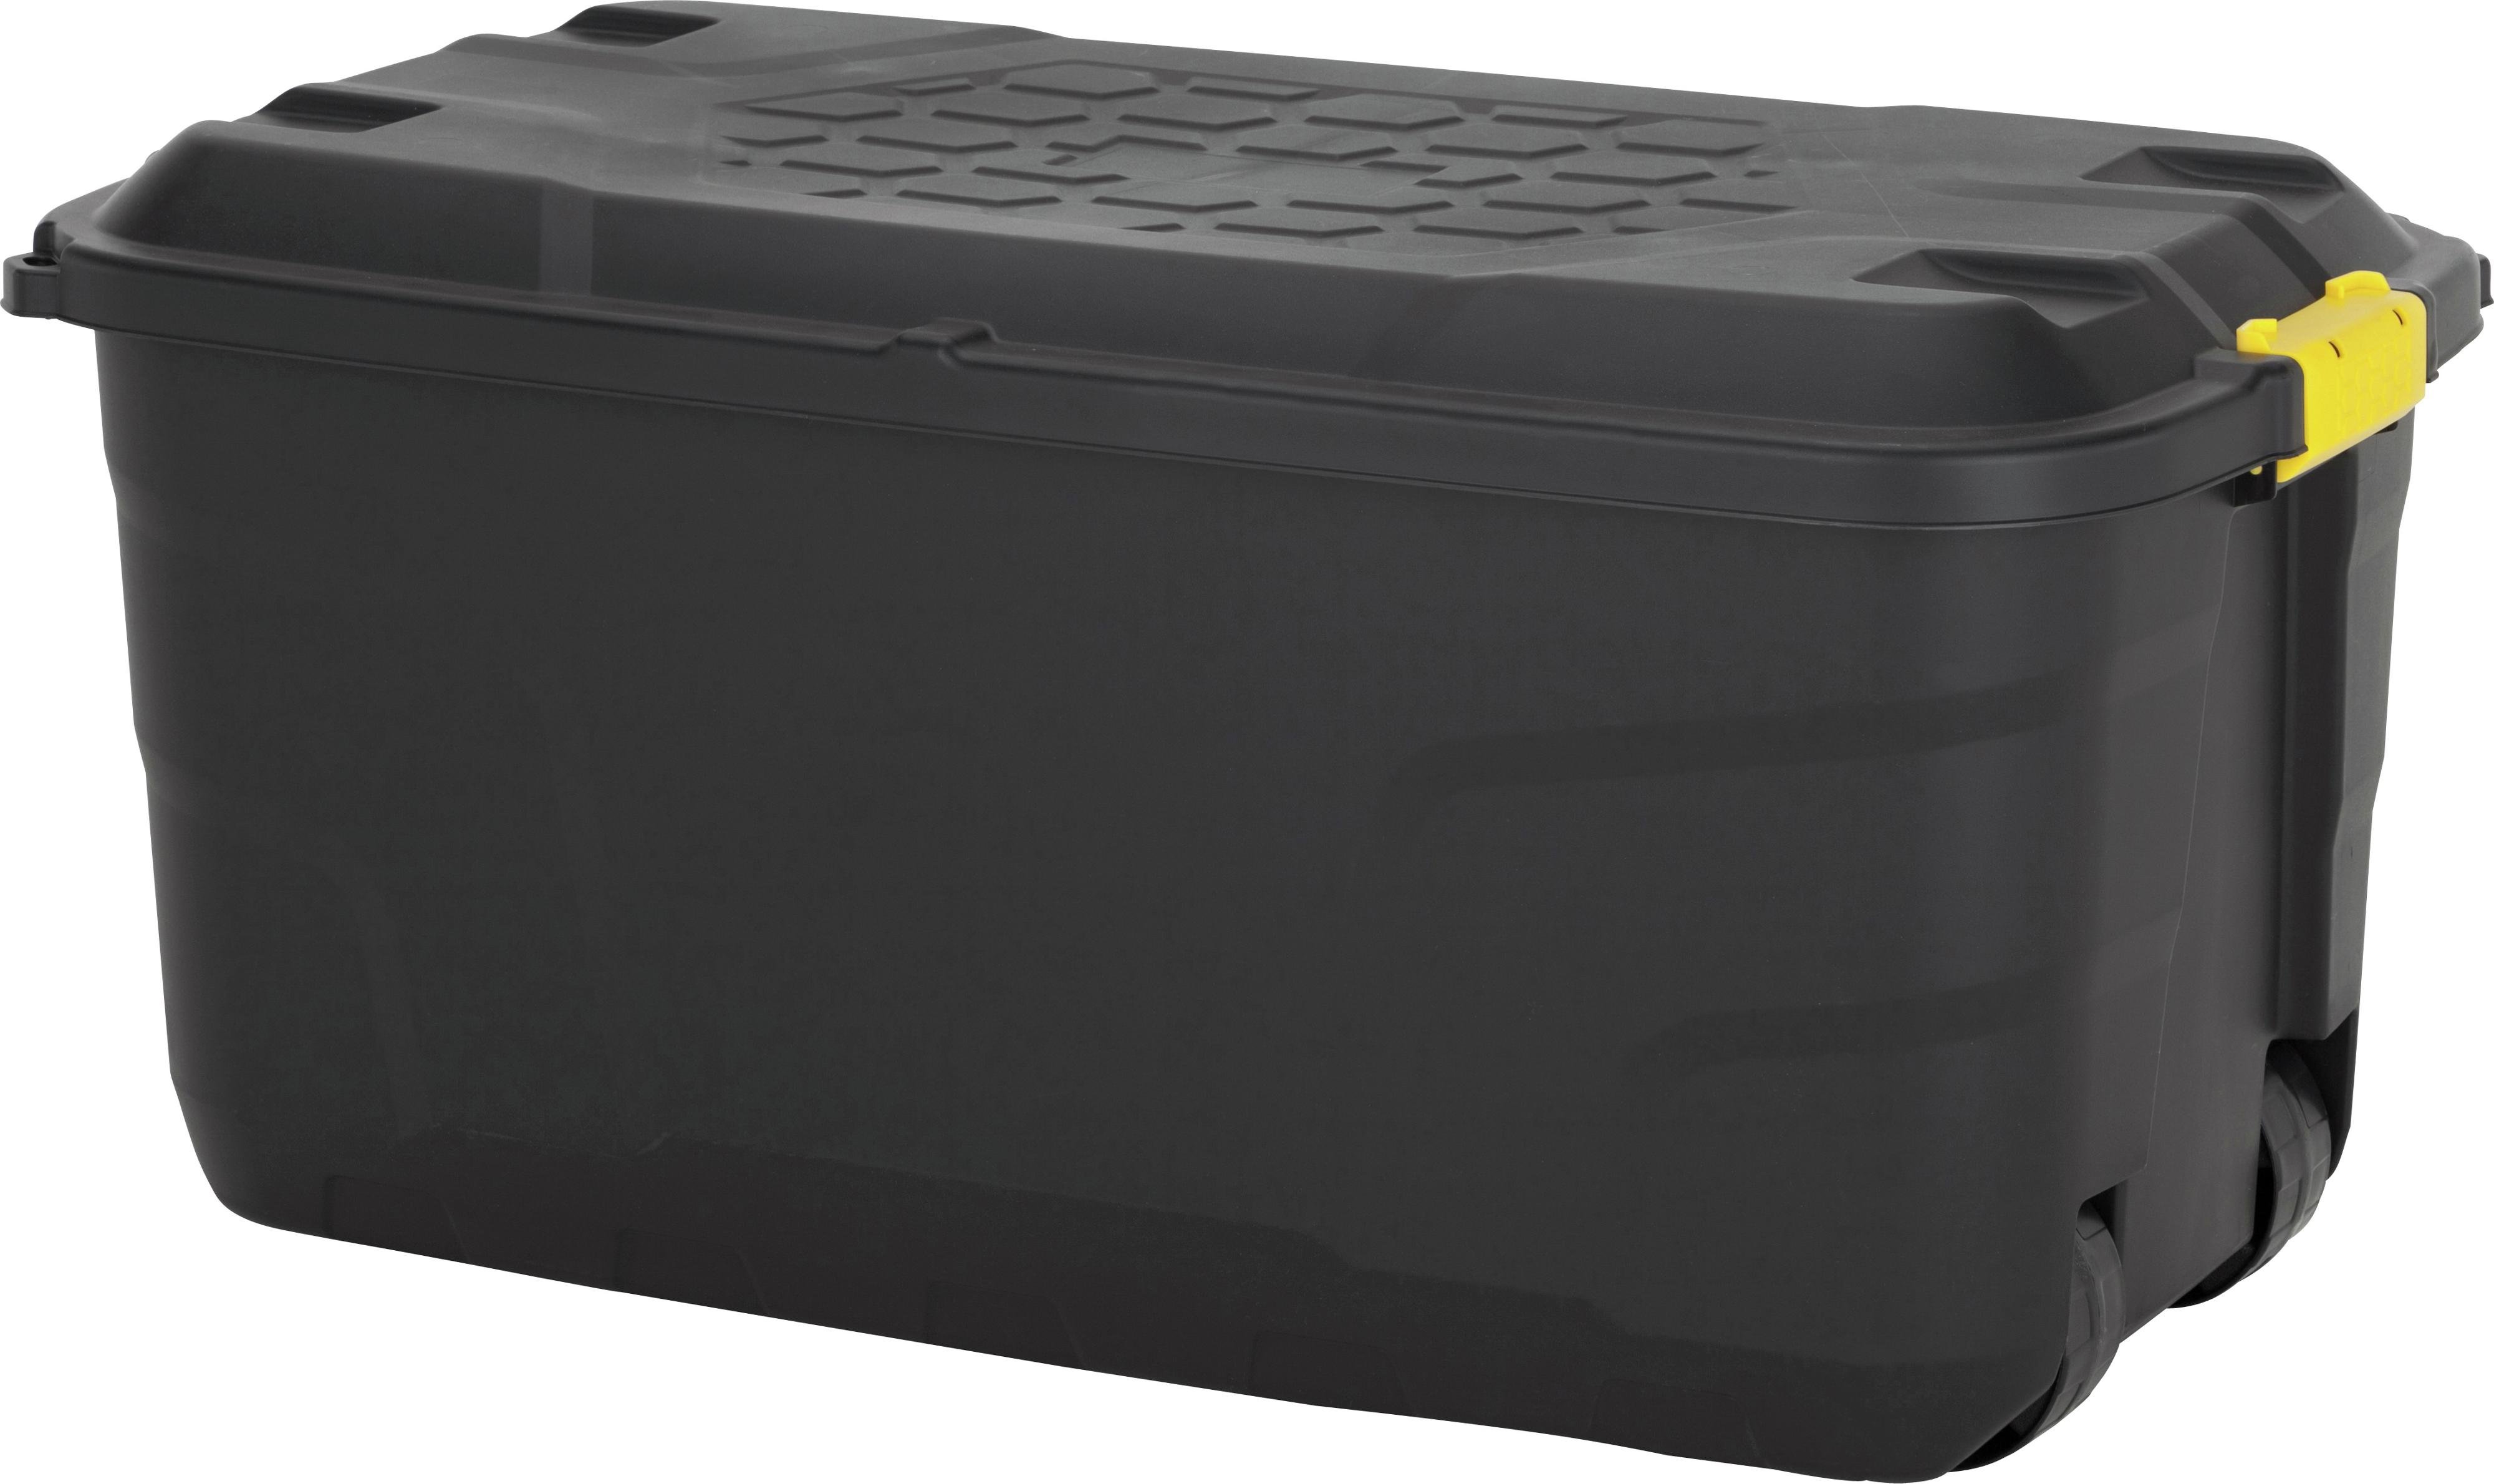 Argos Home 145 Litre Heavy Duty Storage Trunk on Wheels review